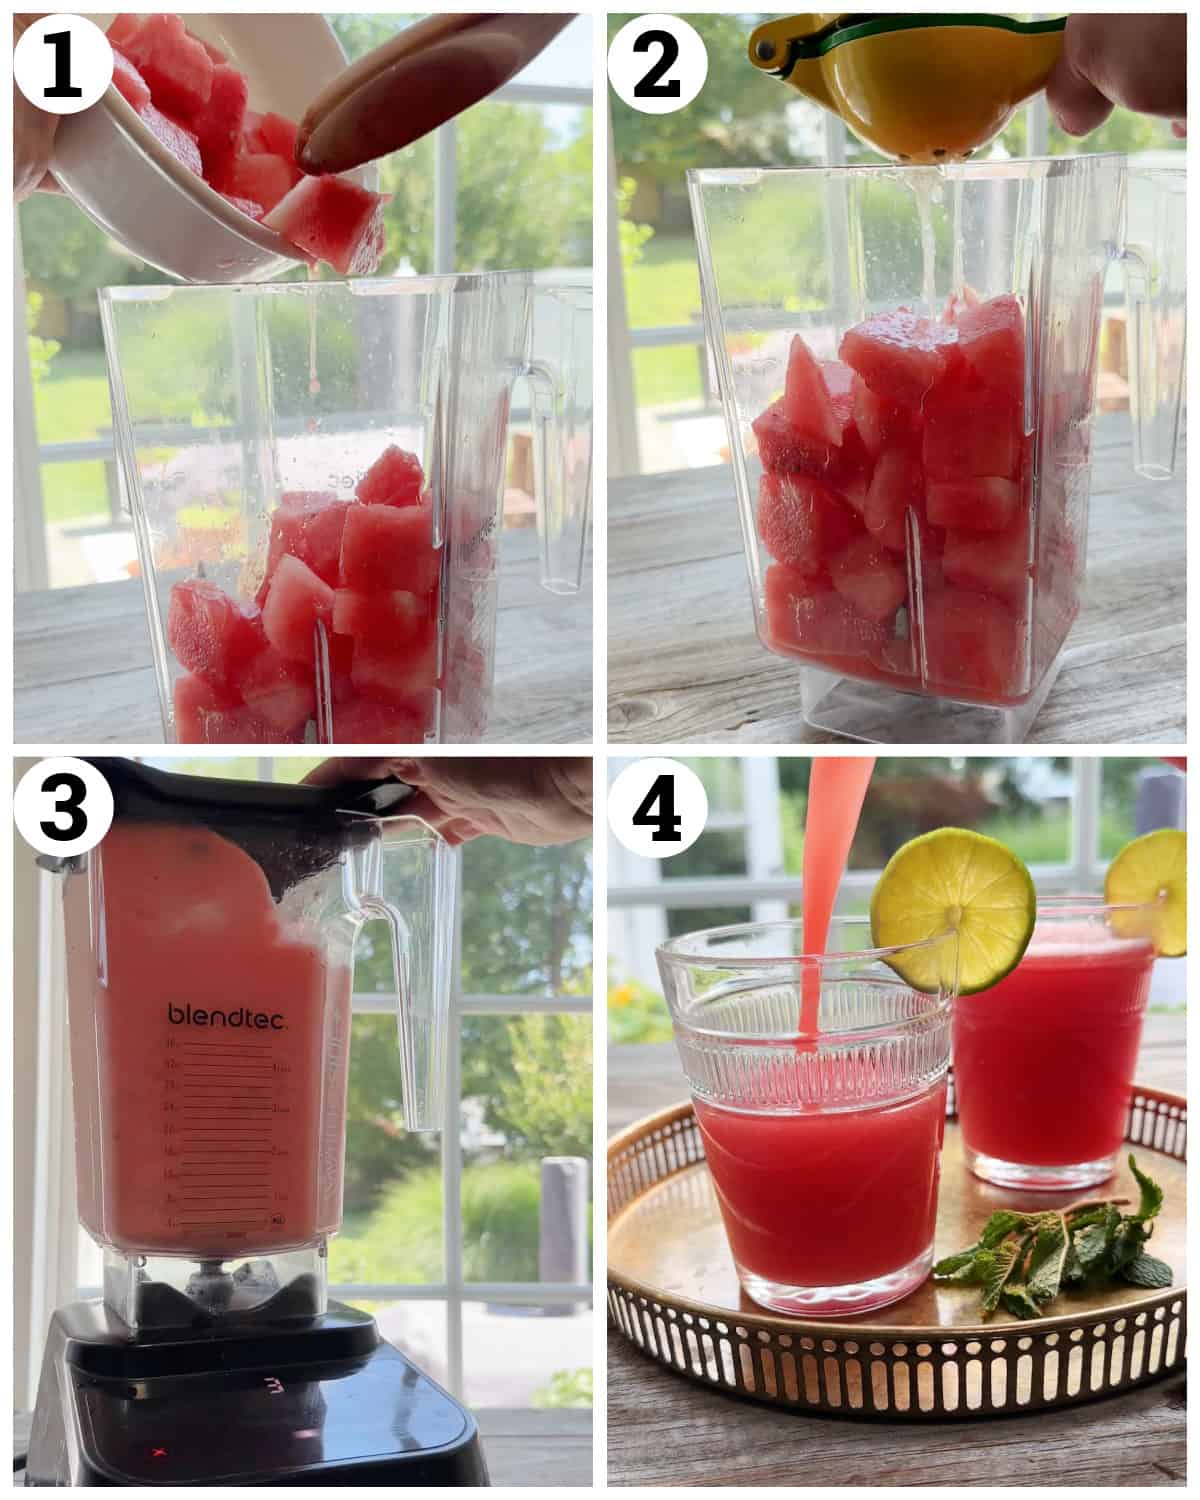 Blend the watermelon cubes and serve the juice in glasses. 